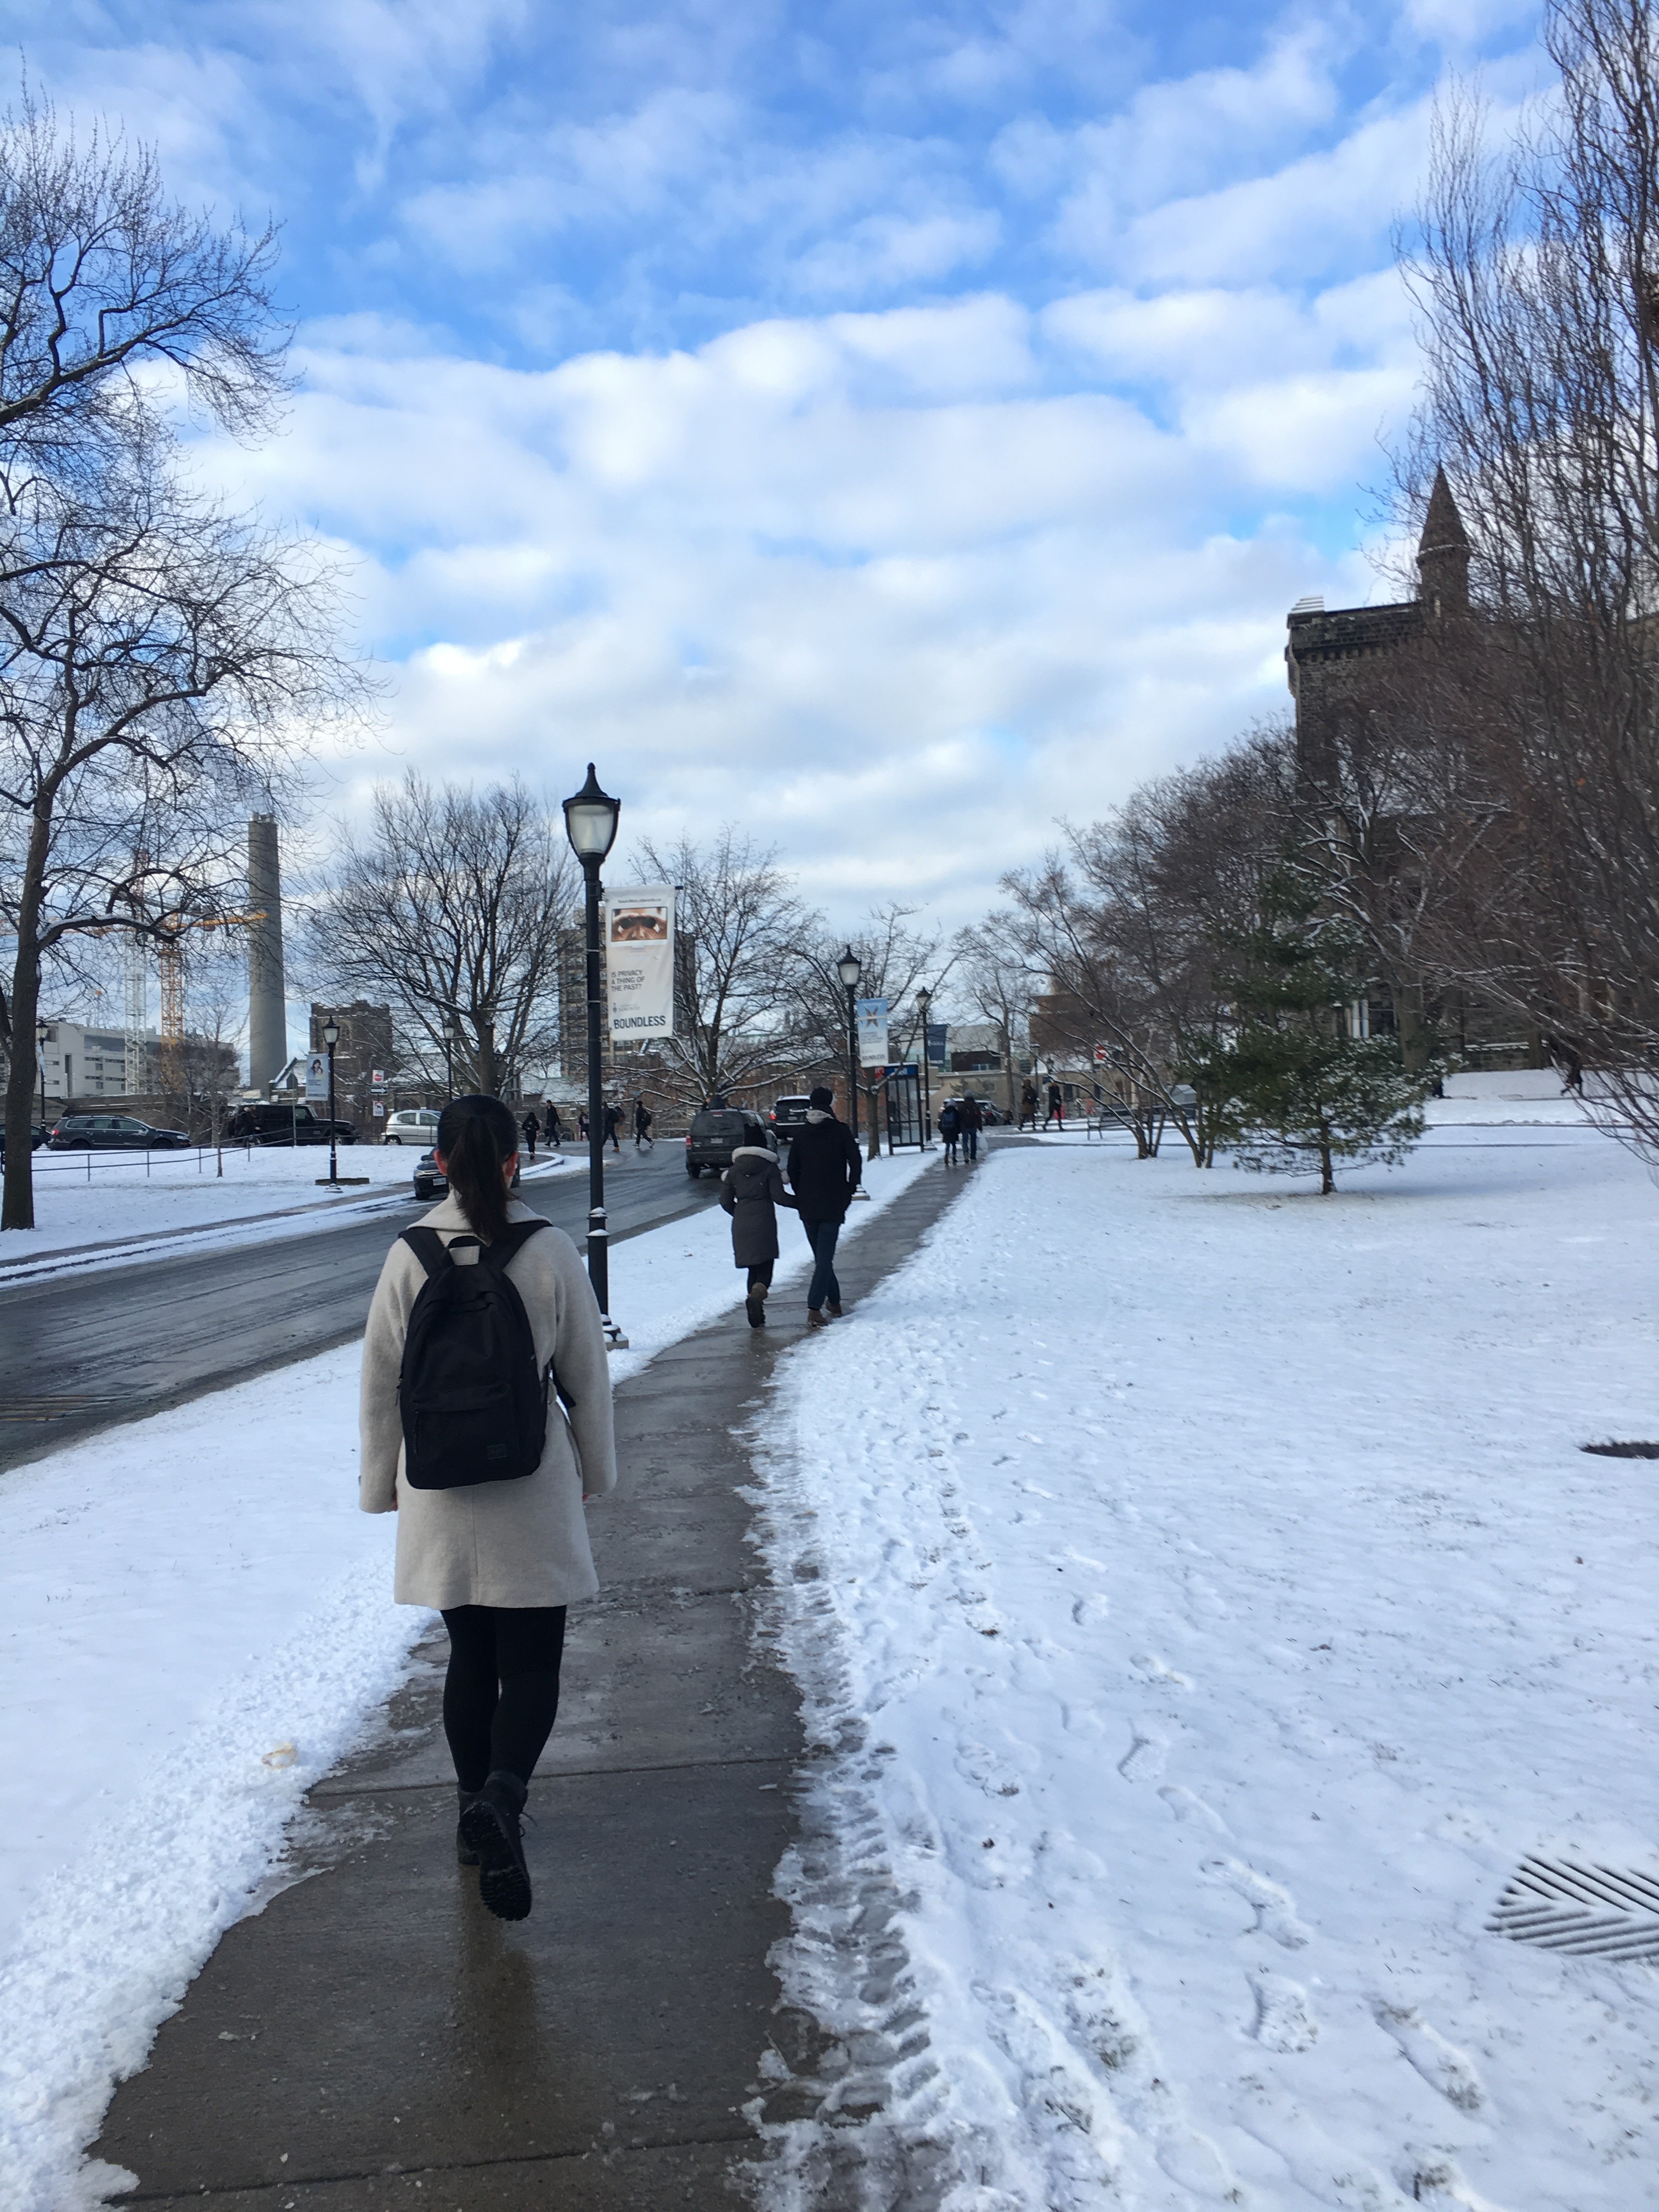 Students walk up a path on a snowy campus.